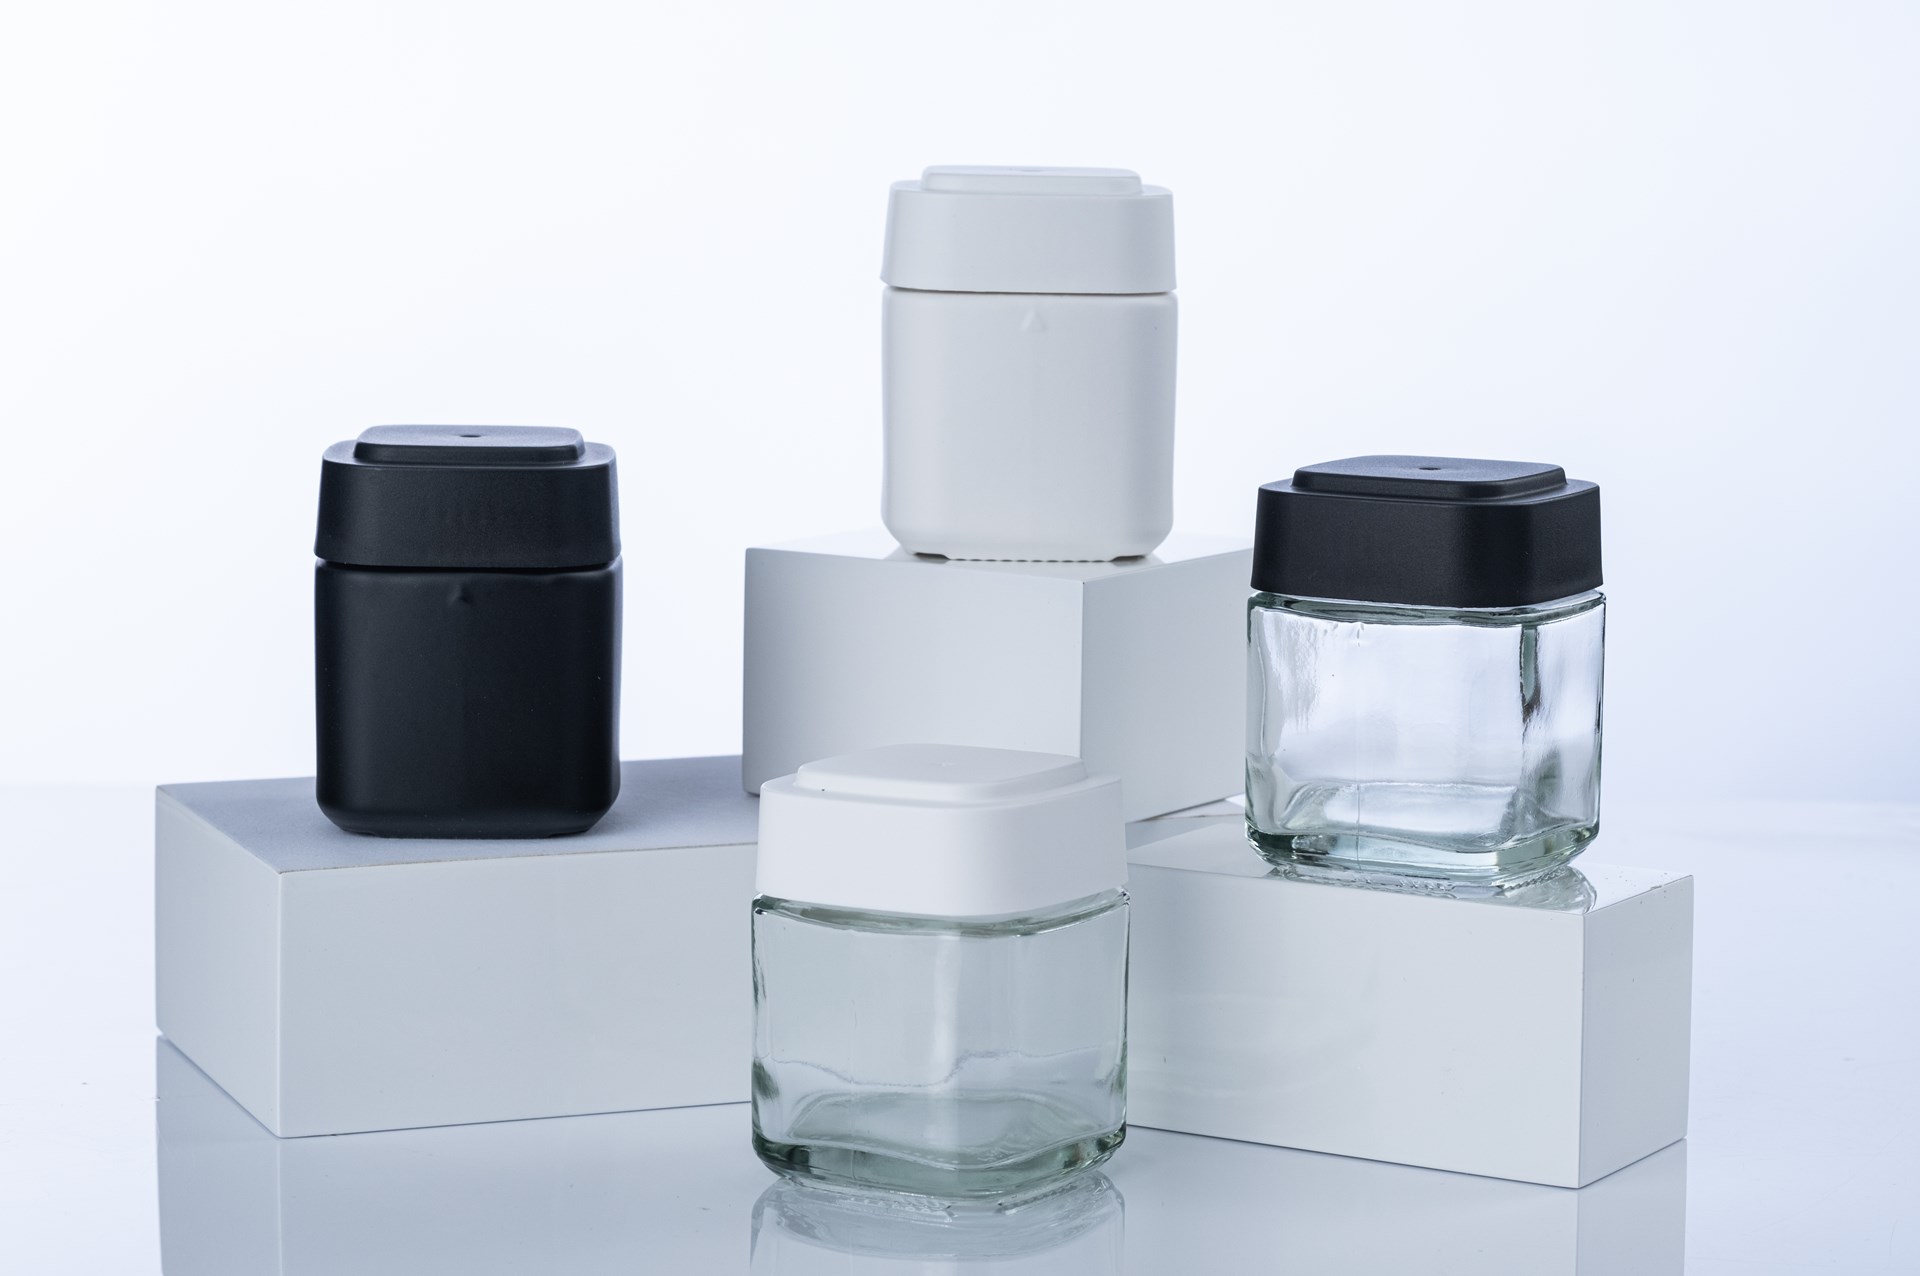 Calyx Jar with black and white lids on clear glass & matte finishes